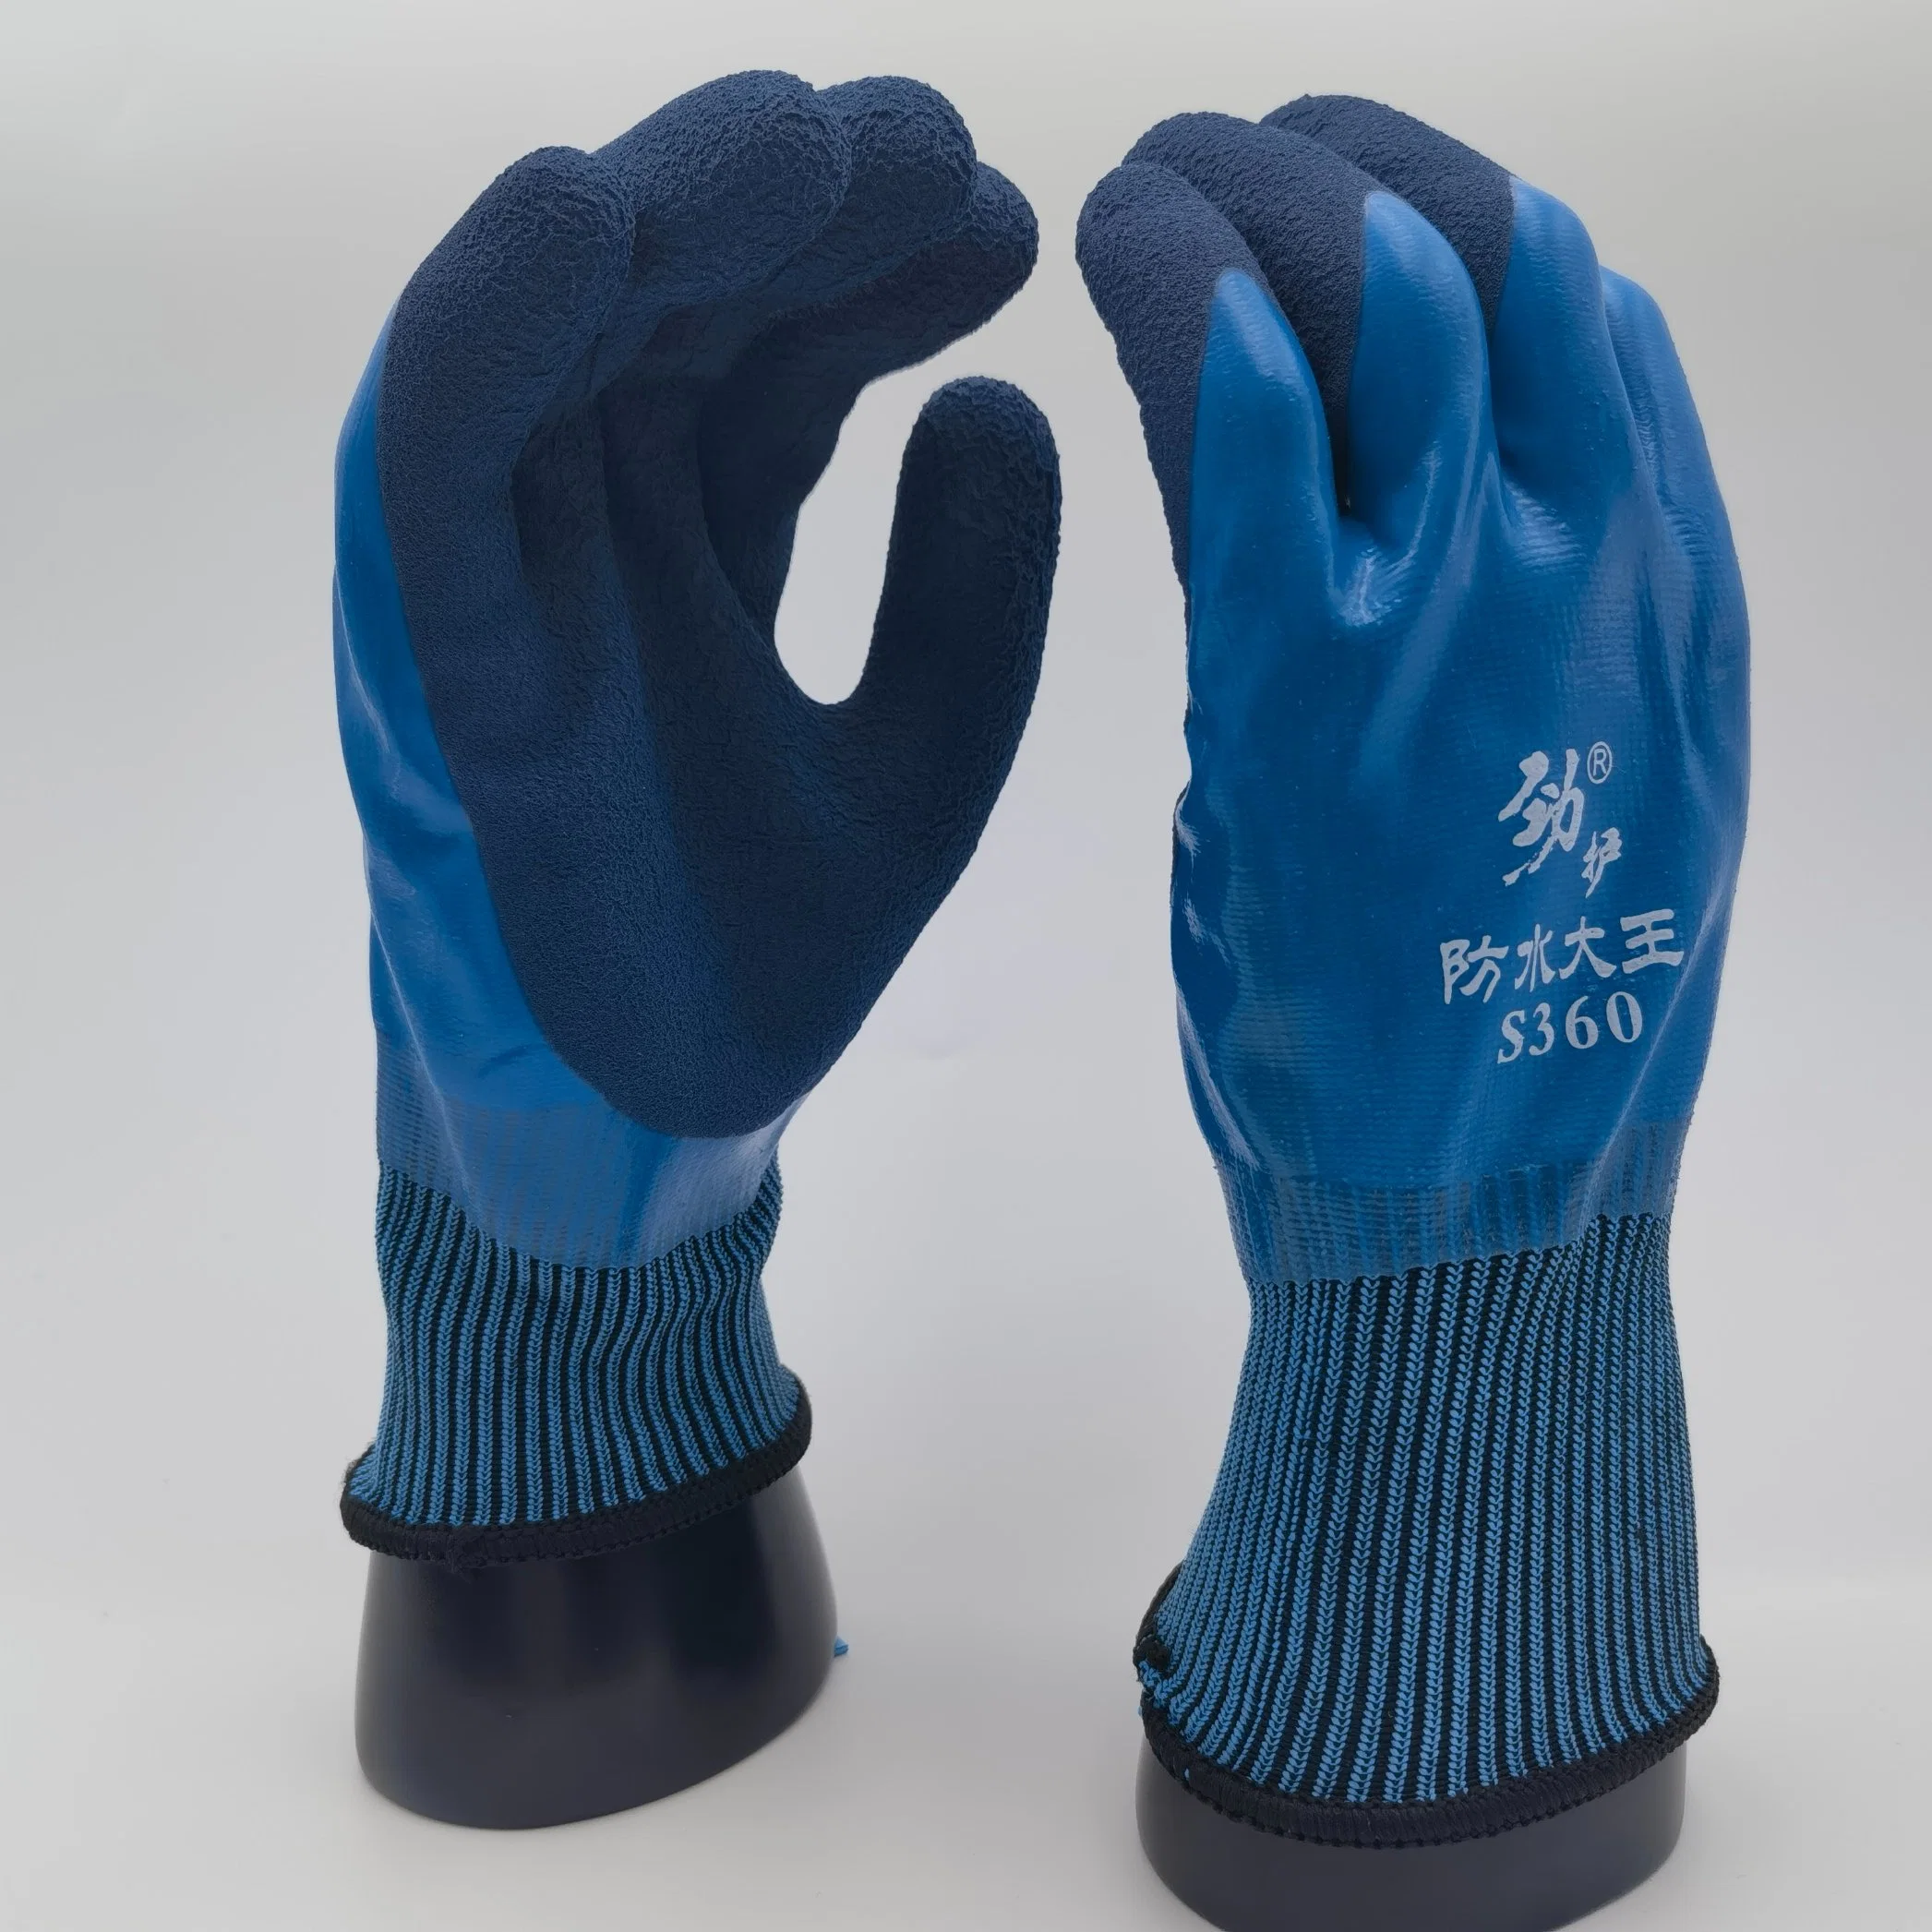 Suitable Price Water Proof Safety Gloves Winter Warm Industrial Safety Work Gloves